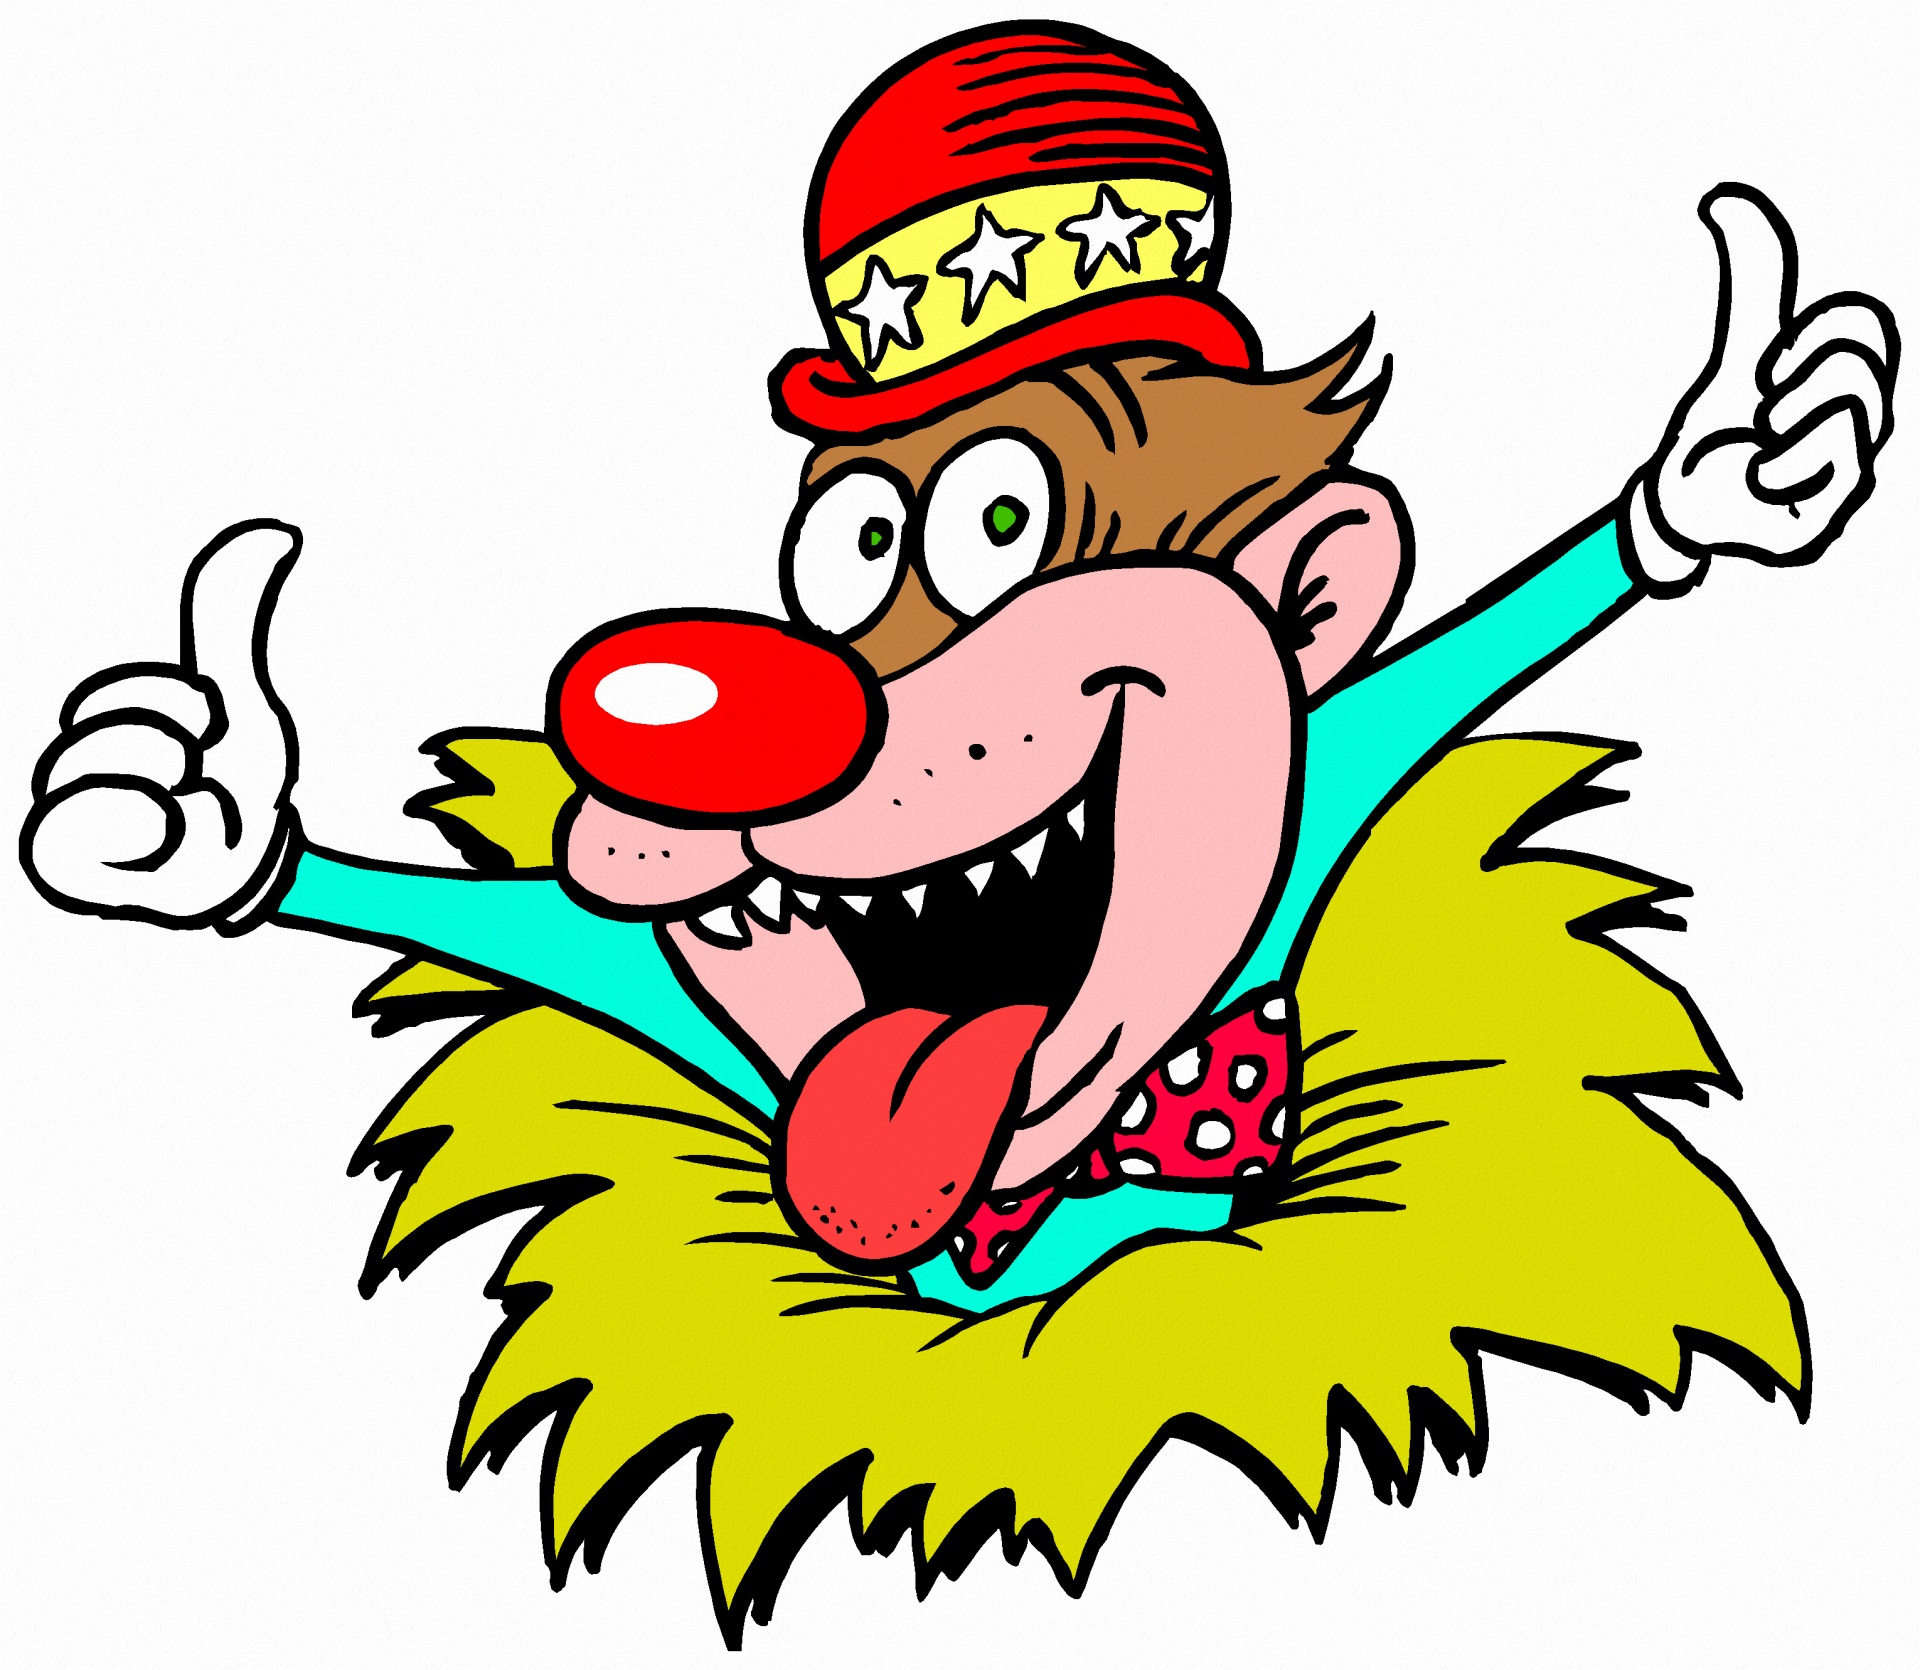 Clown,thumbs up,fun,laugh,cartoon - free image from 